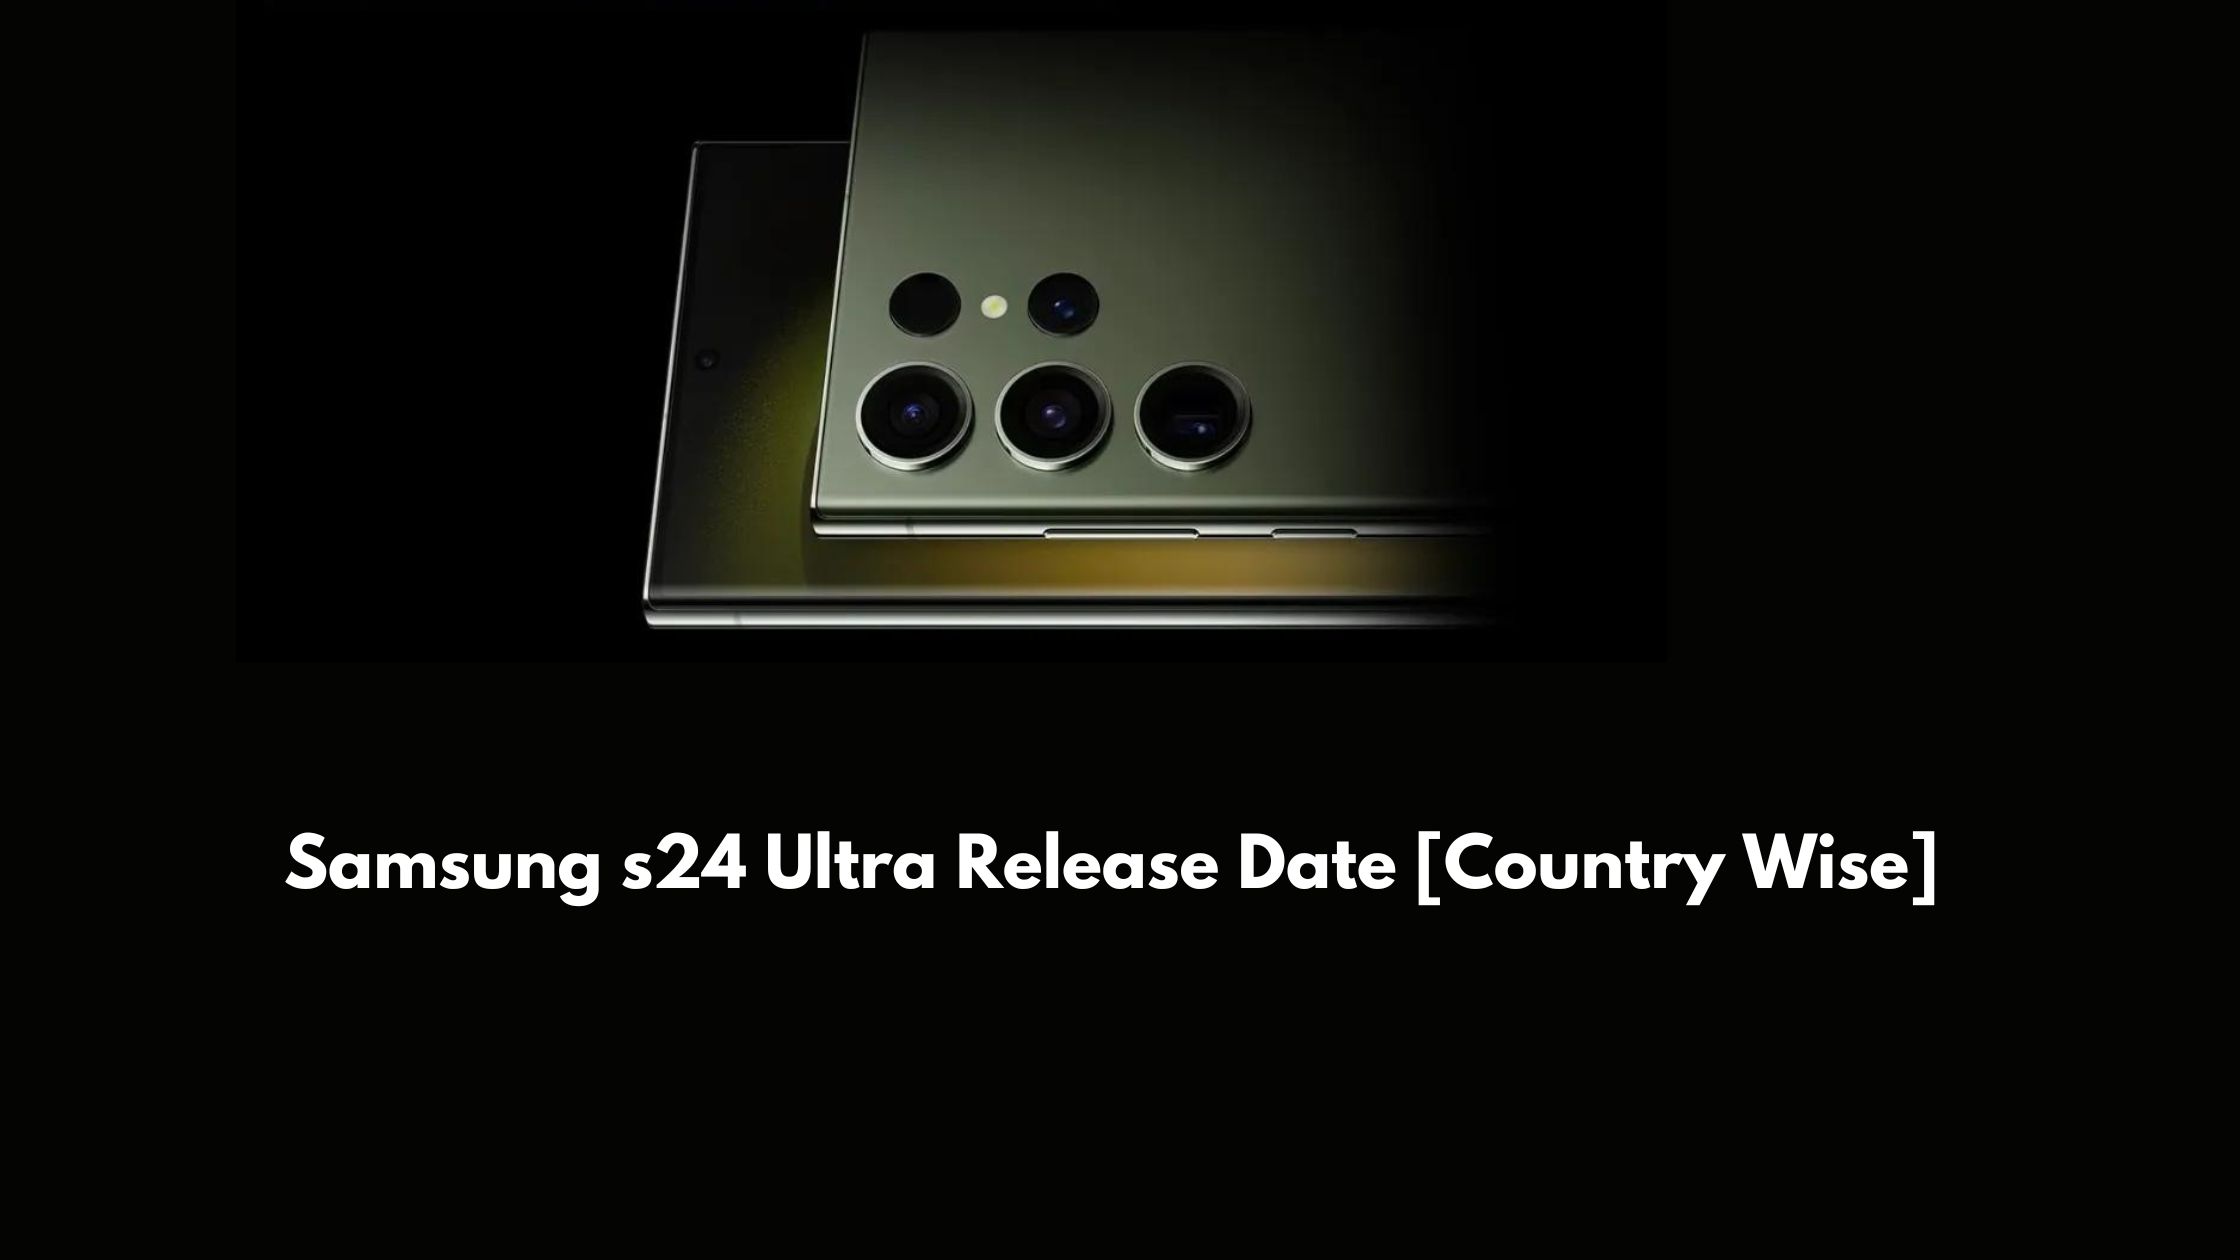 Samsung s24 Ultra Release Date [Country Wise]